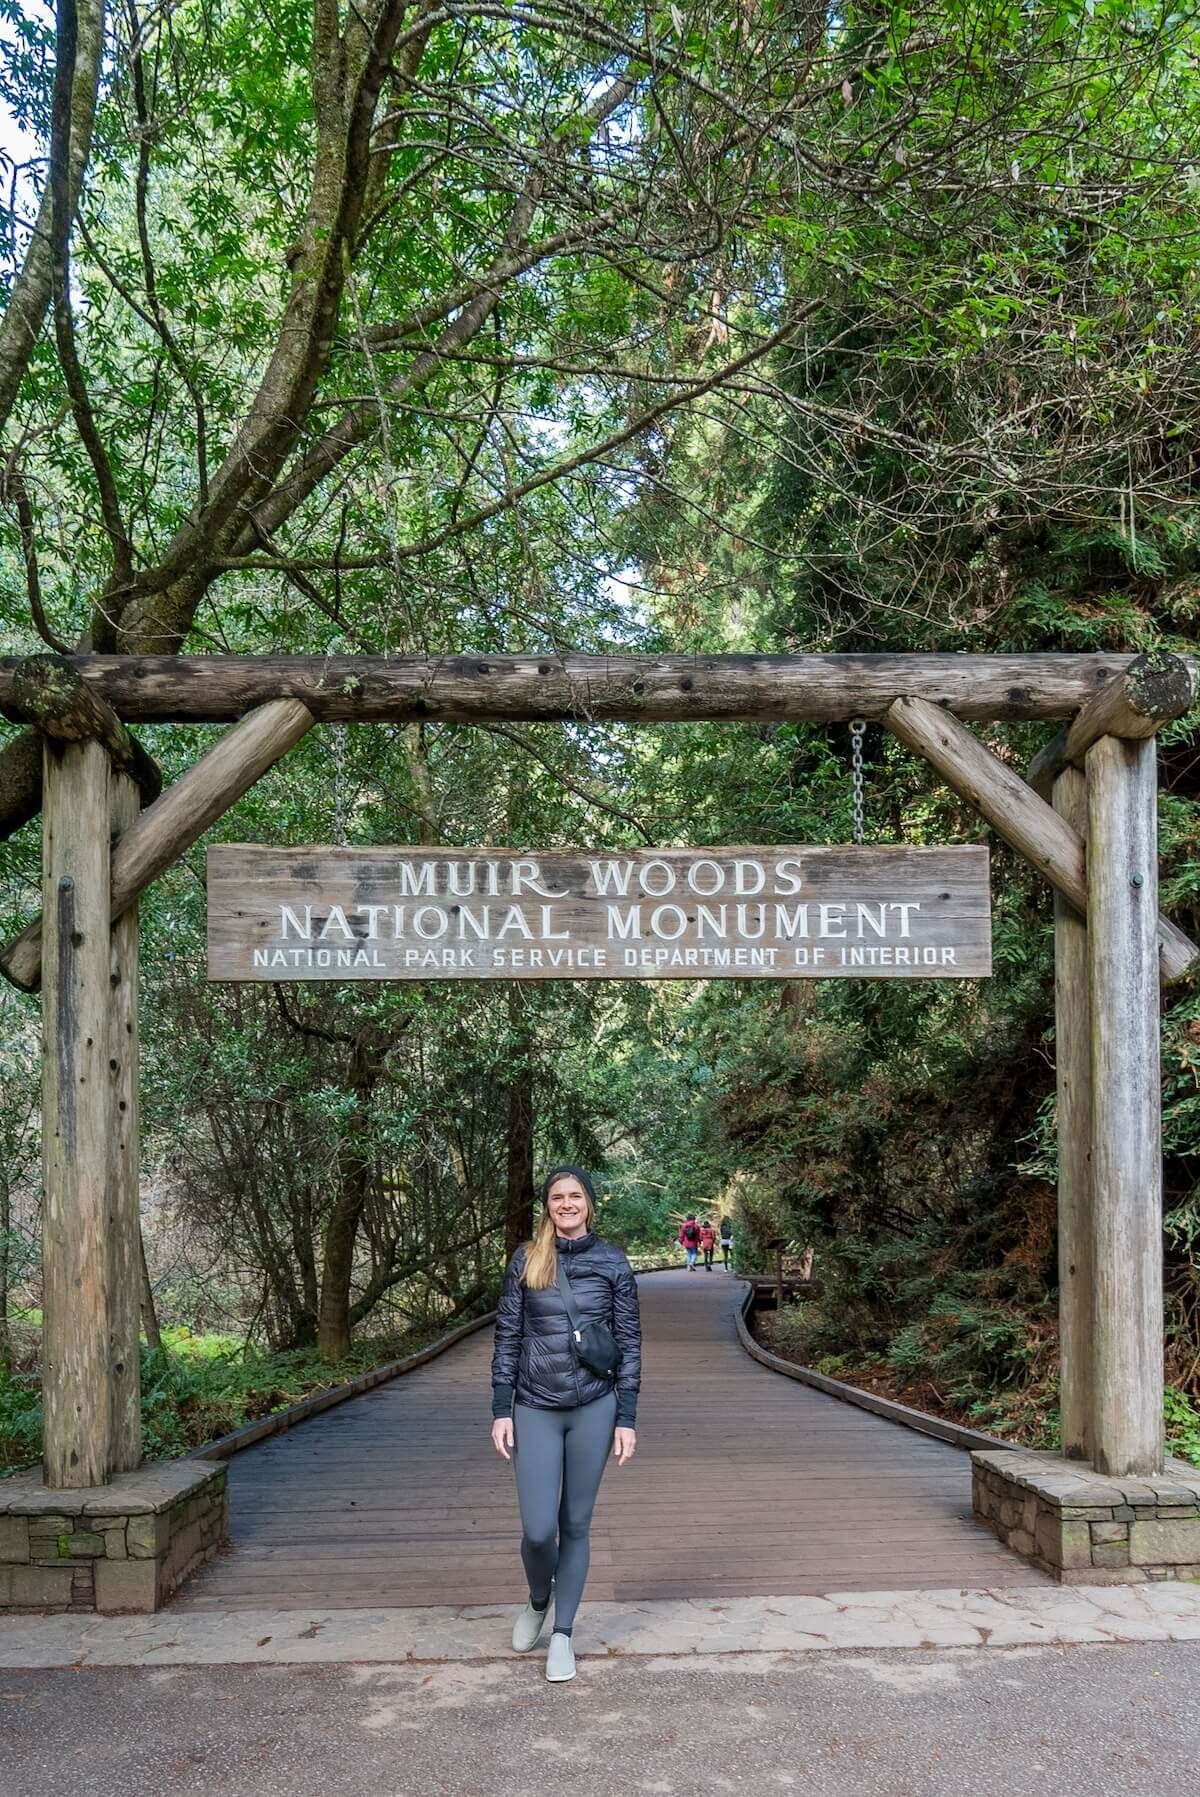 A female hiker in grey leggings and a black windbreak standing beneath a wooden sign marking the entrance to the Muir Woods Main Trail.